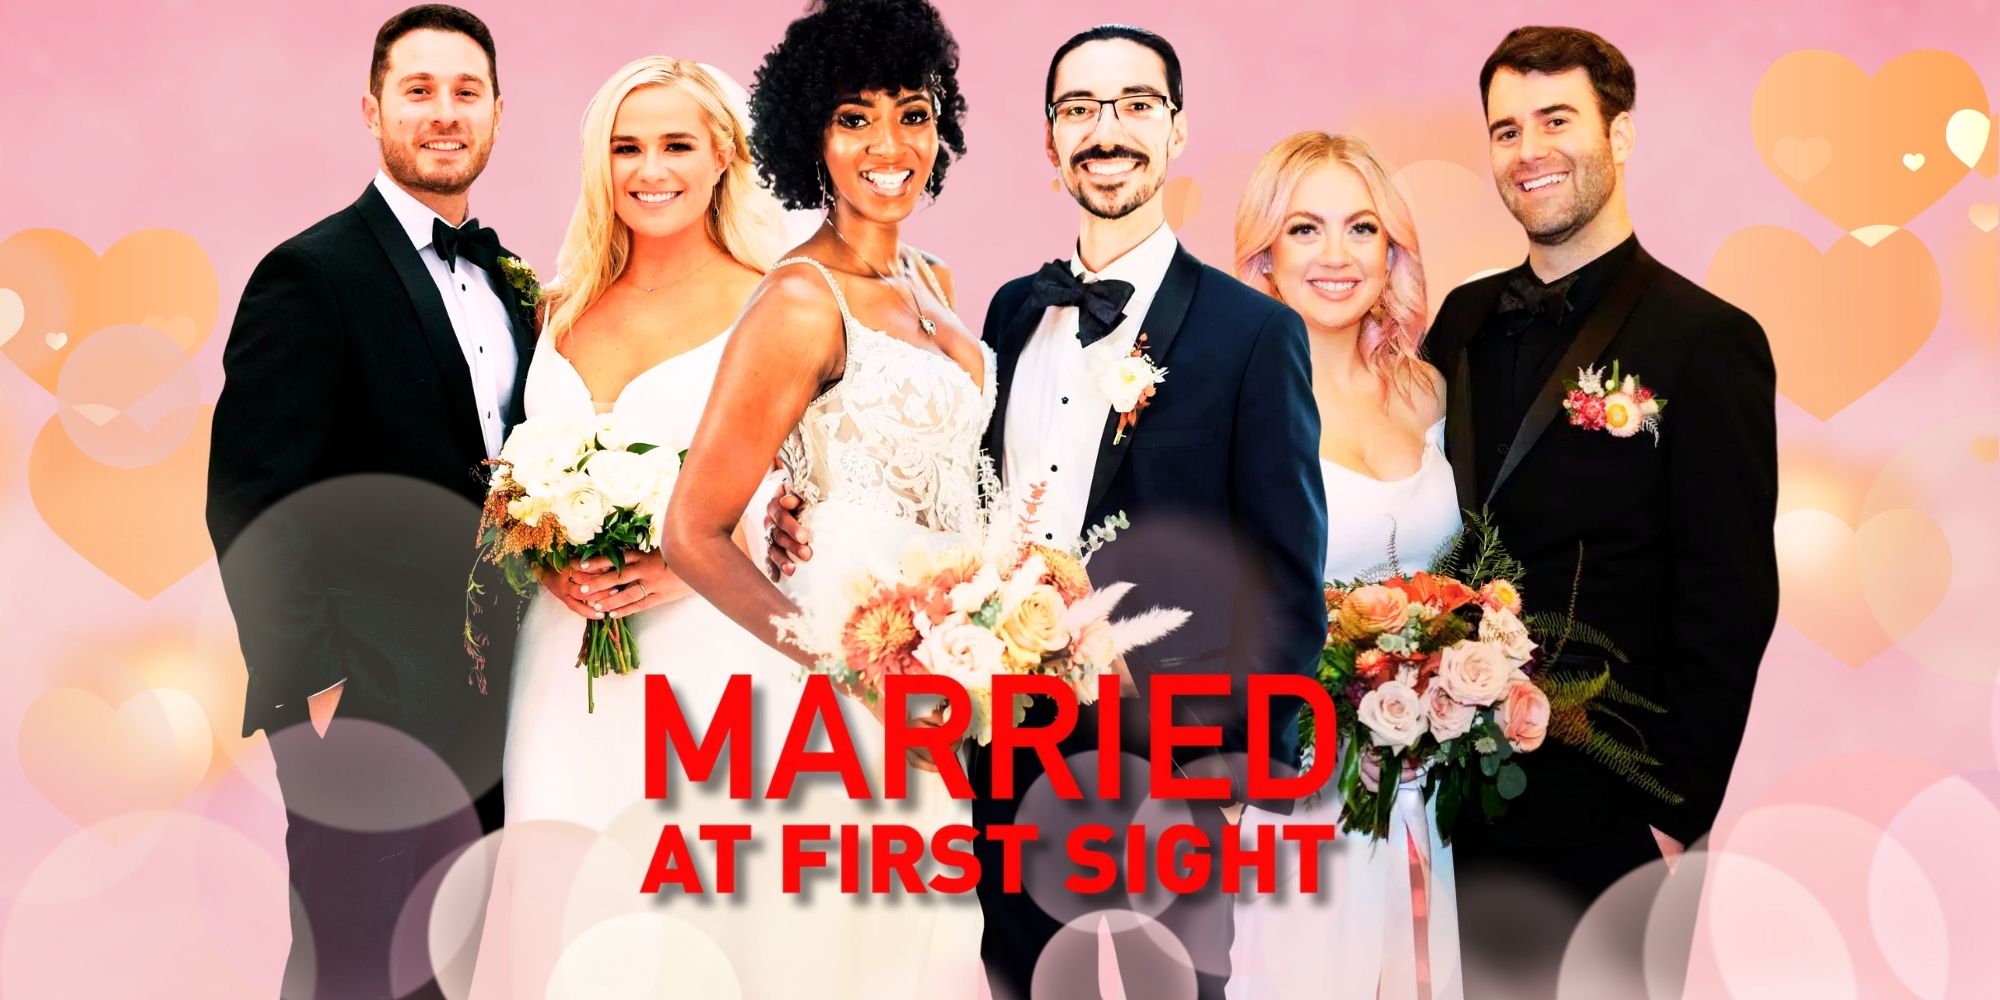 Married At First Sight season 17 cast members in wedding attire